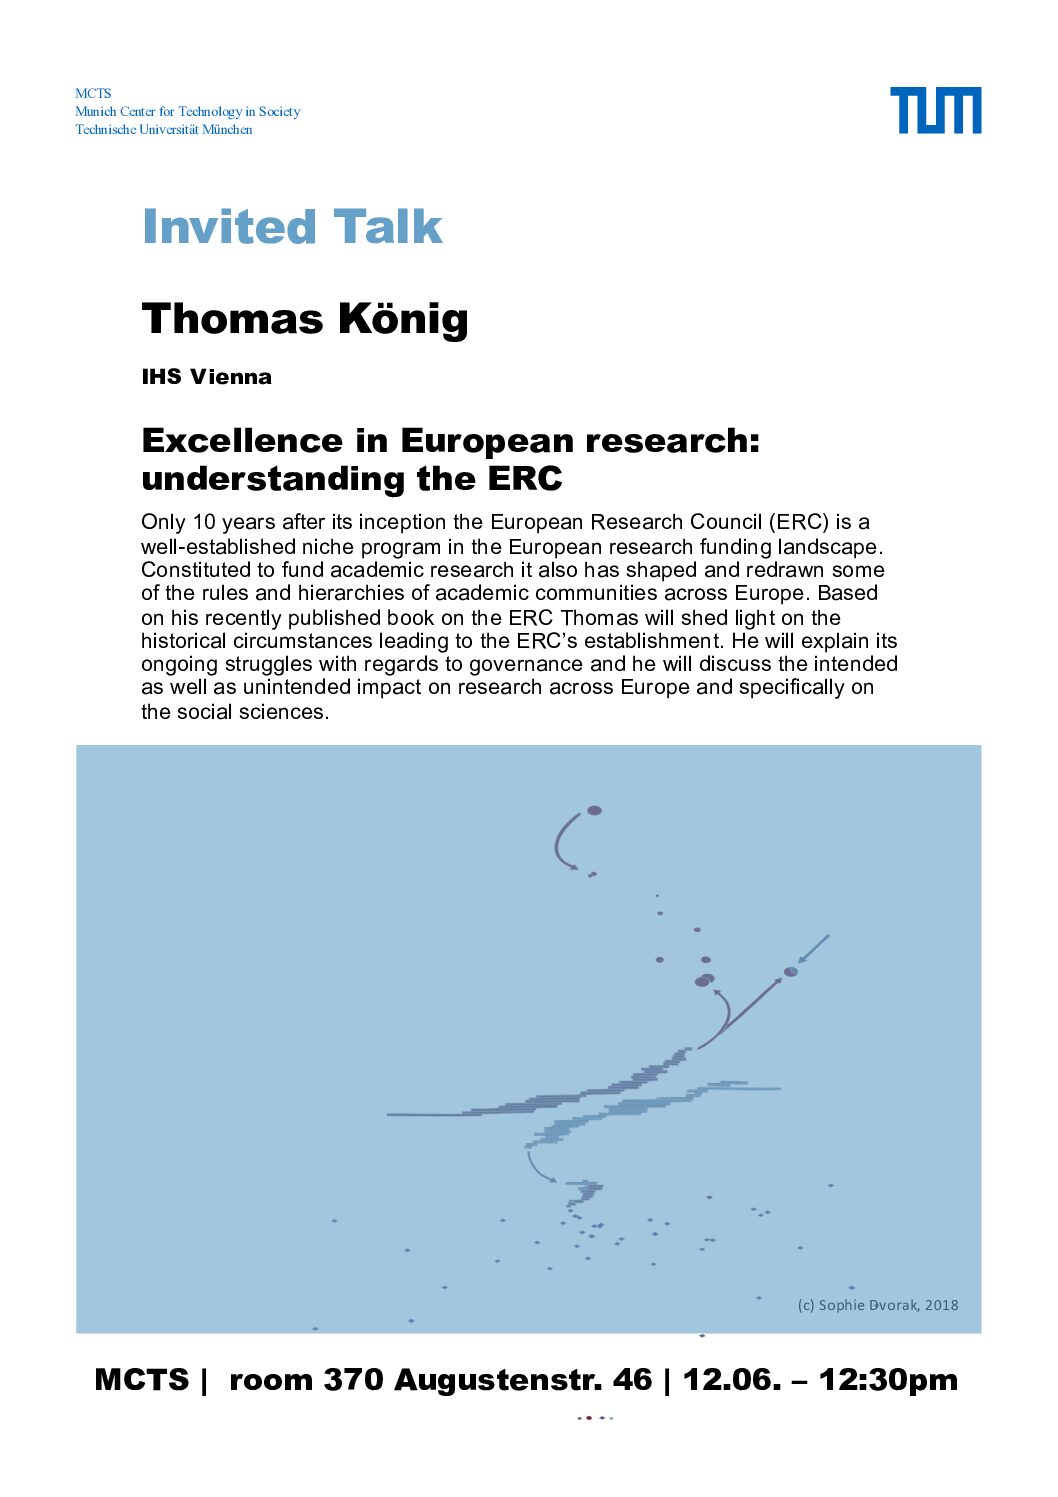 Organisation of a Lecture: T. König, "Excellence in European Research: Understanding the ERC", 12.06.2018